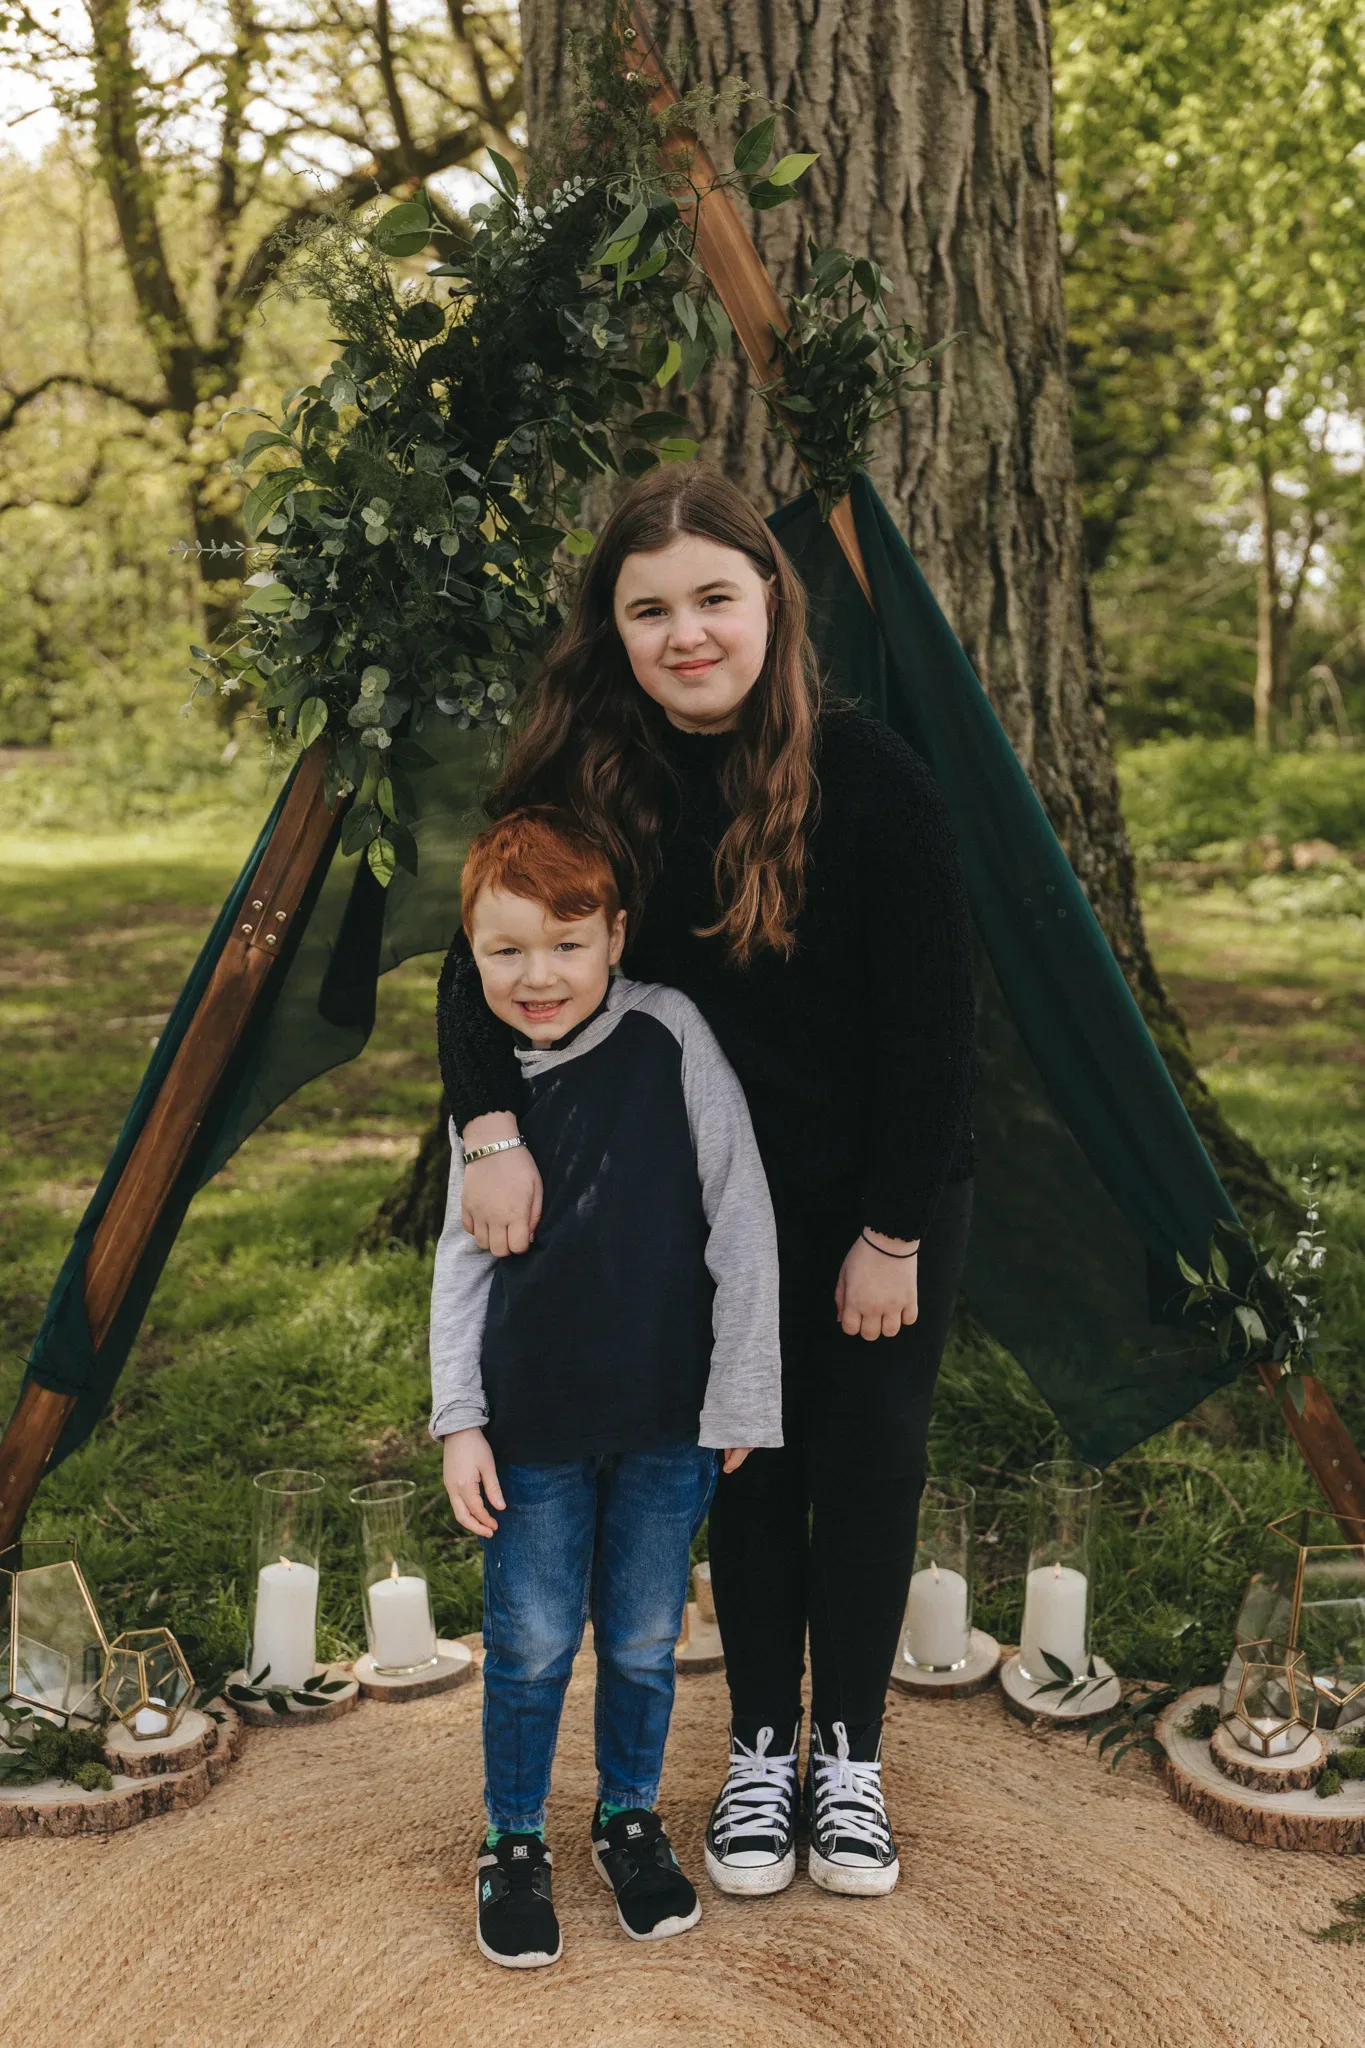 A young girl with long brown hair and a black sweater stands beside a younger boy with red hair and a blue vest, both smiling in front of a wooden teepee adorned with greenery, set in a lush park.